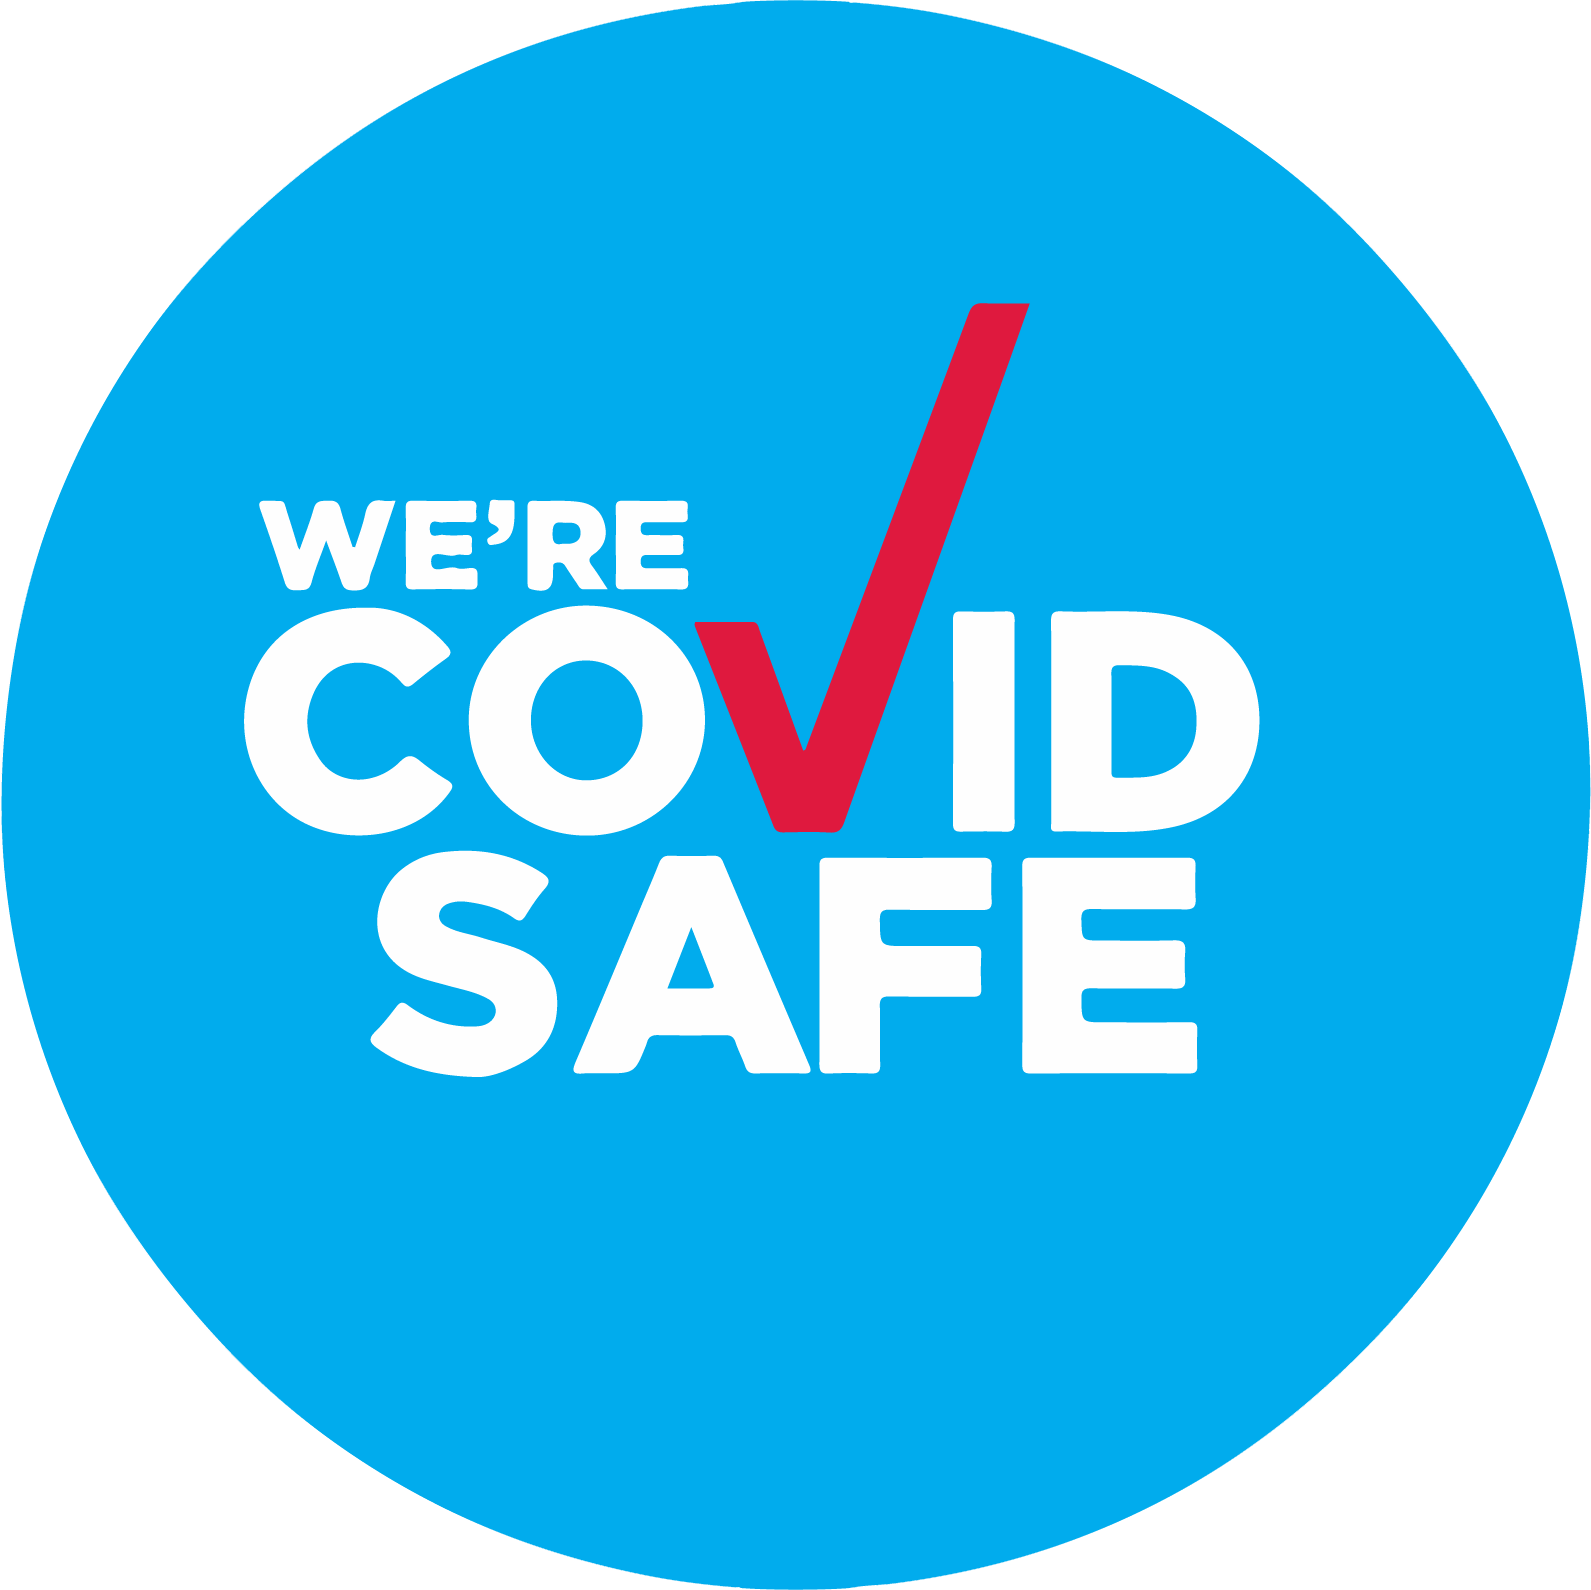 We're COVID Safe